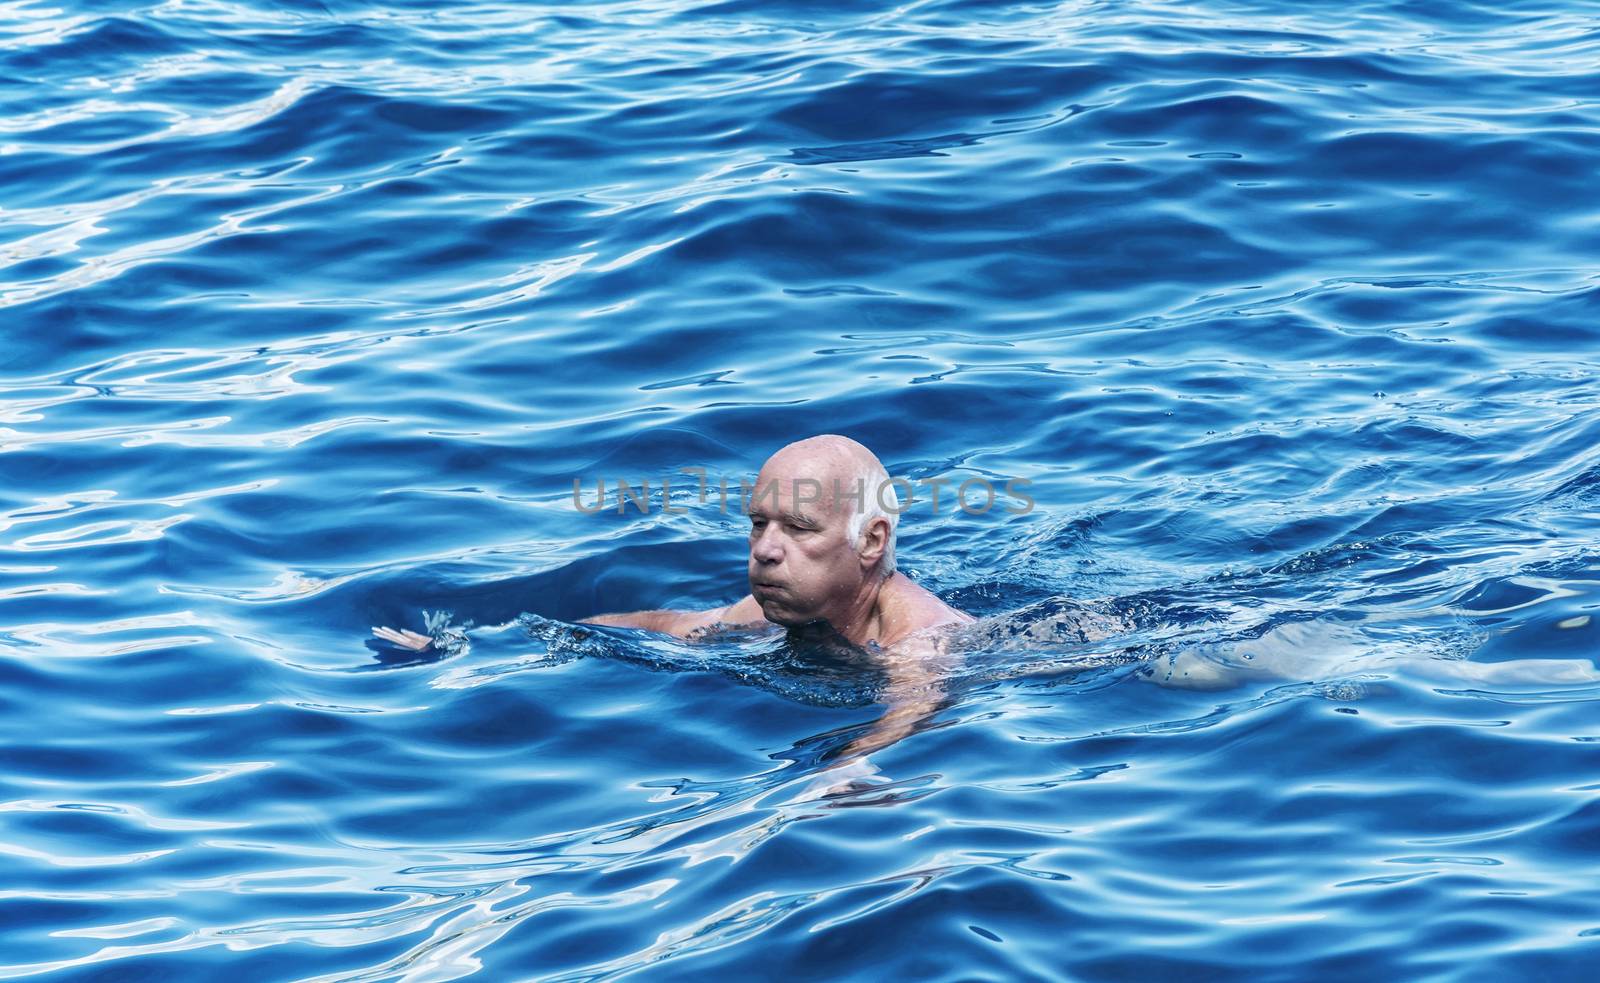 A man of mature age with gray hair bathes in water